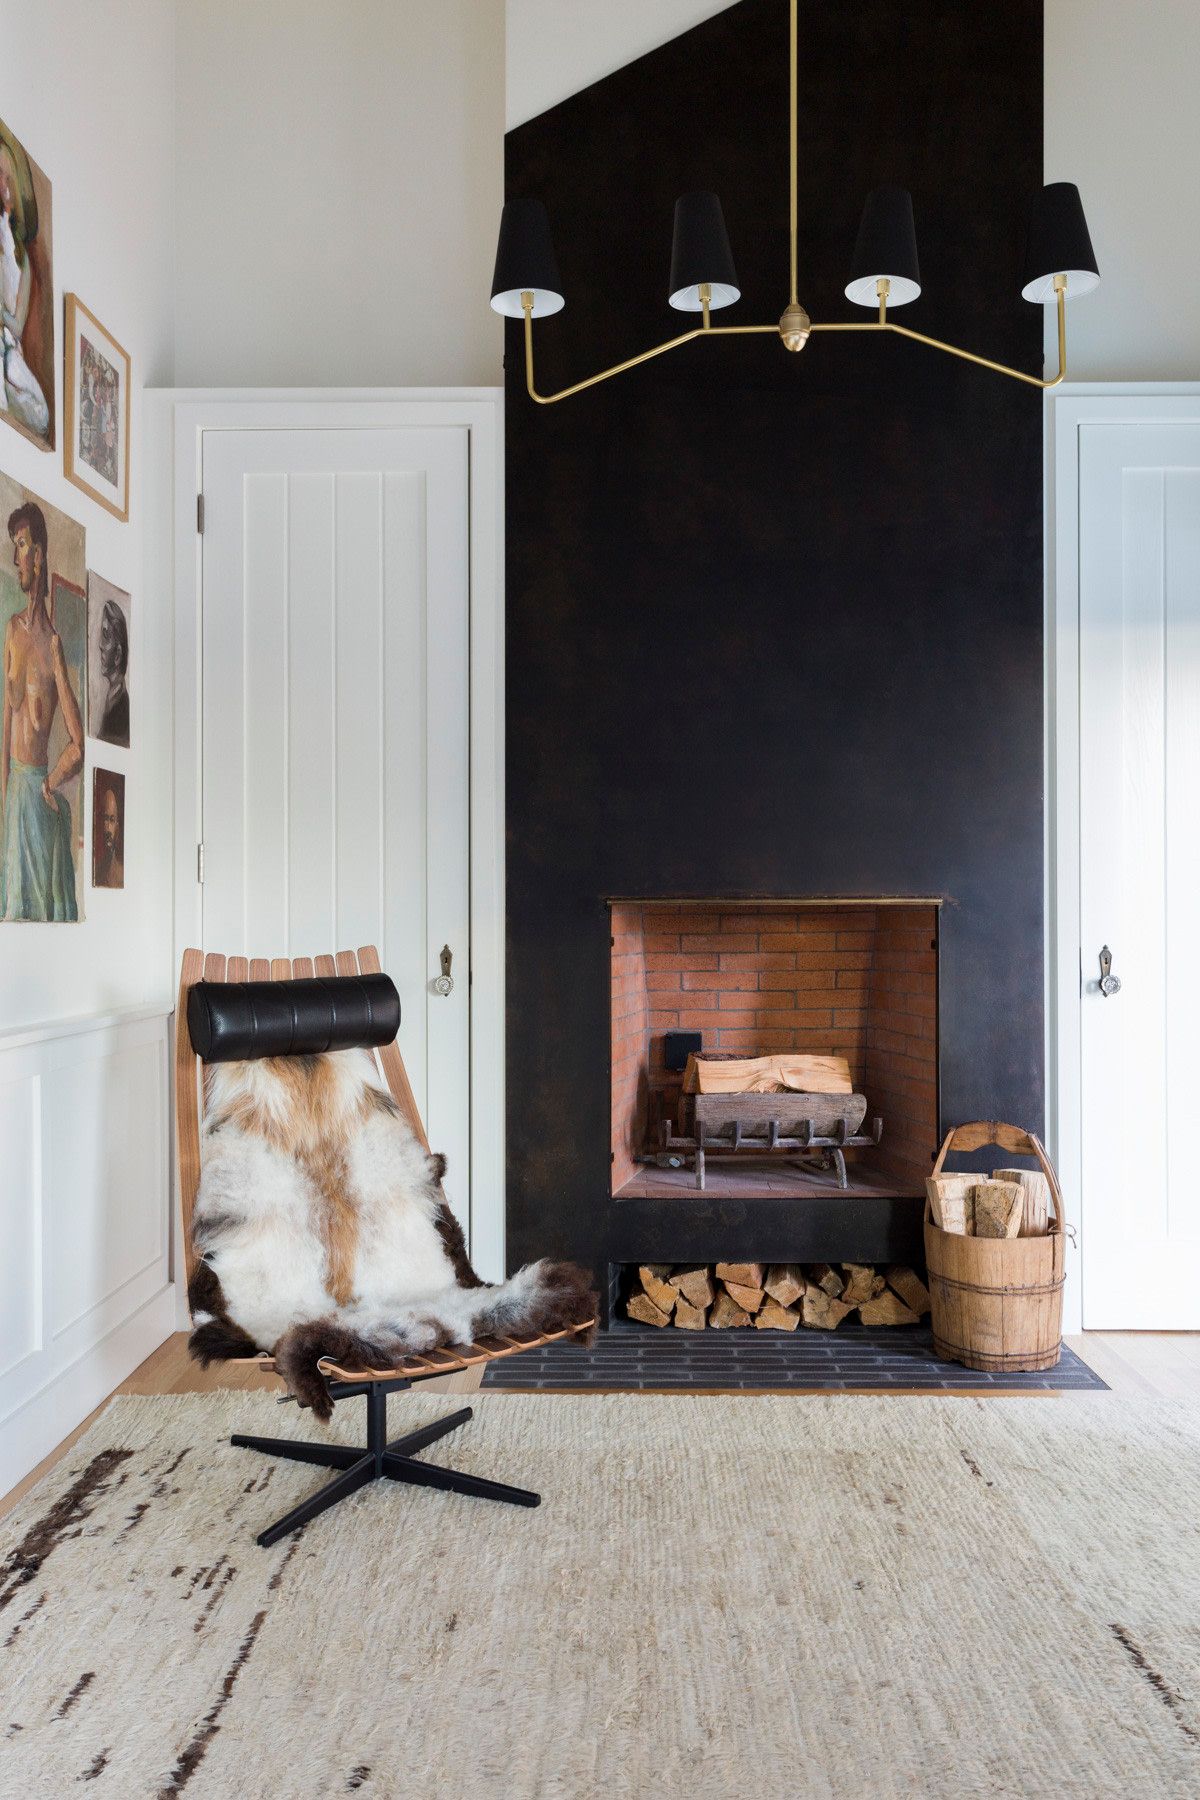 Fireplace Mantels San Diego Fresh How A Young Couple Infused their Colorful Personalities Into